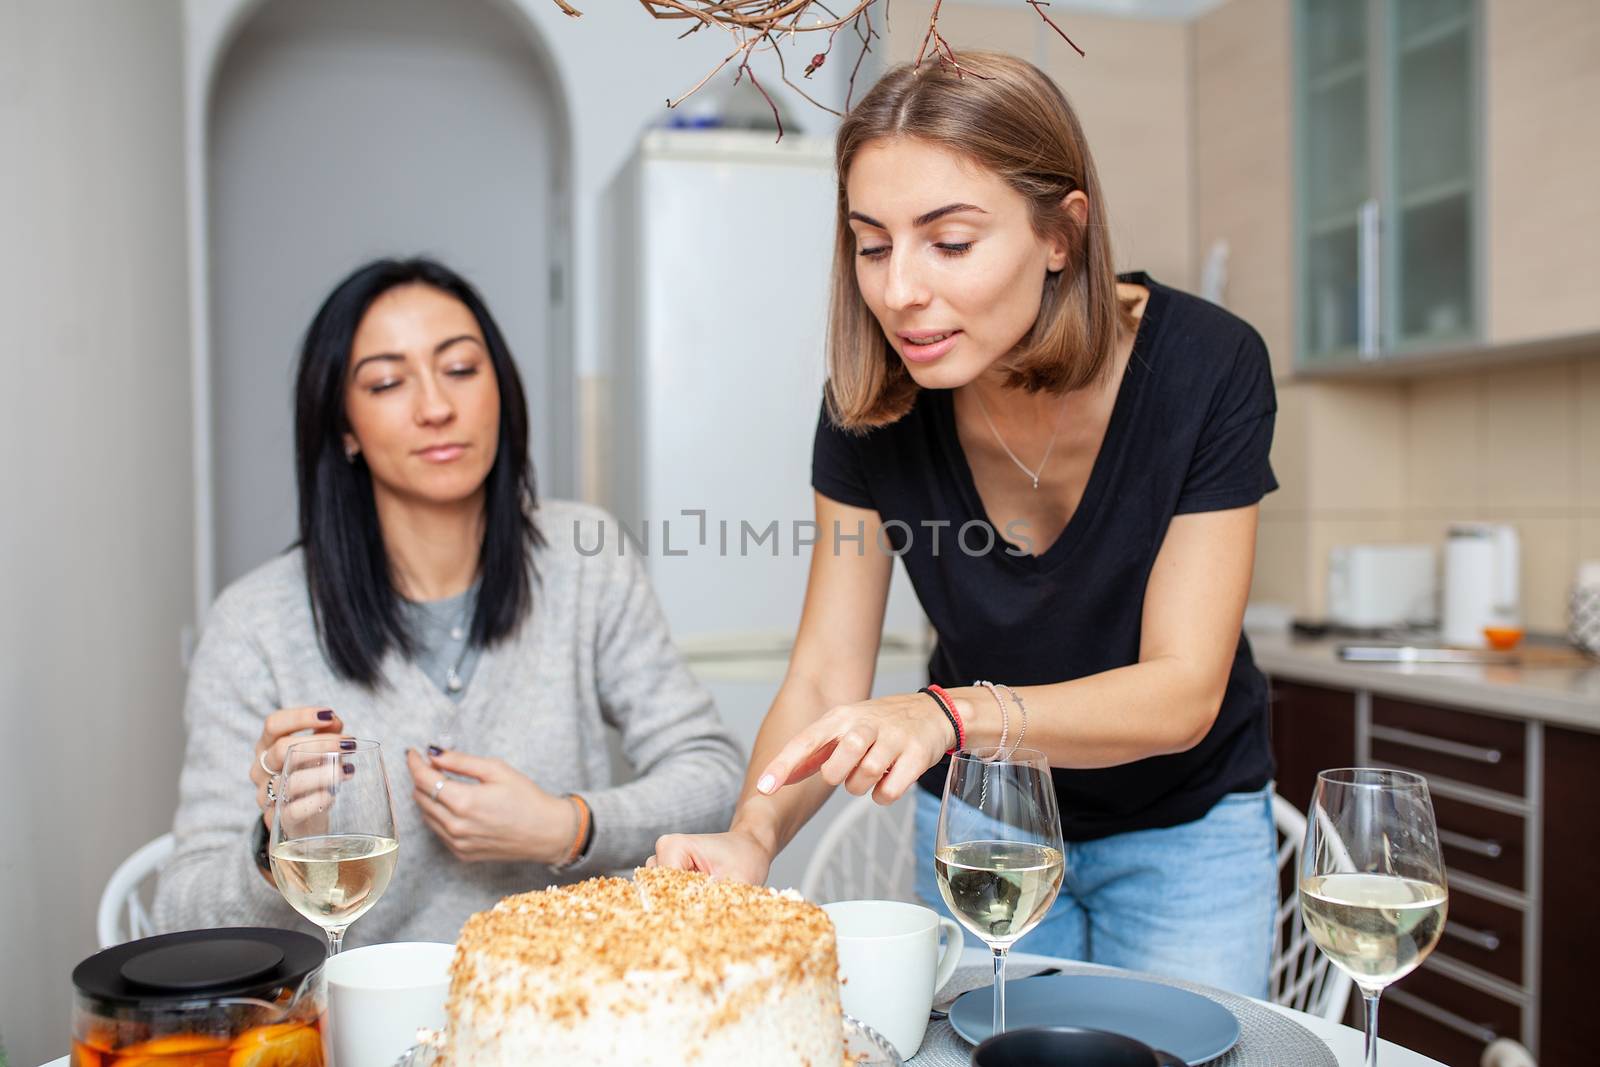 Friends meeting with wine and cake in the modern style kitchen. Women smile and joke by andreonegin